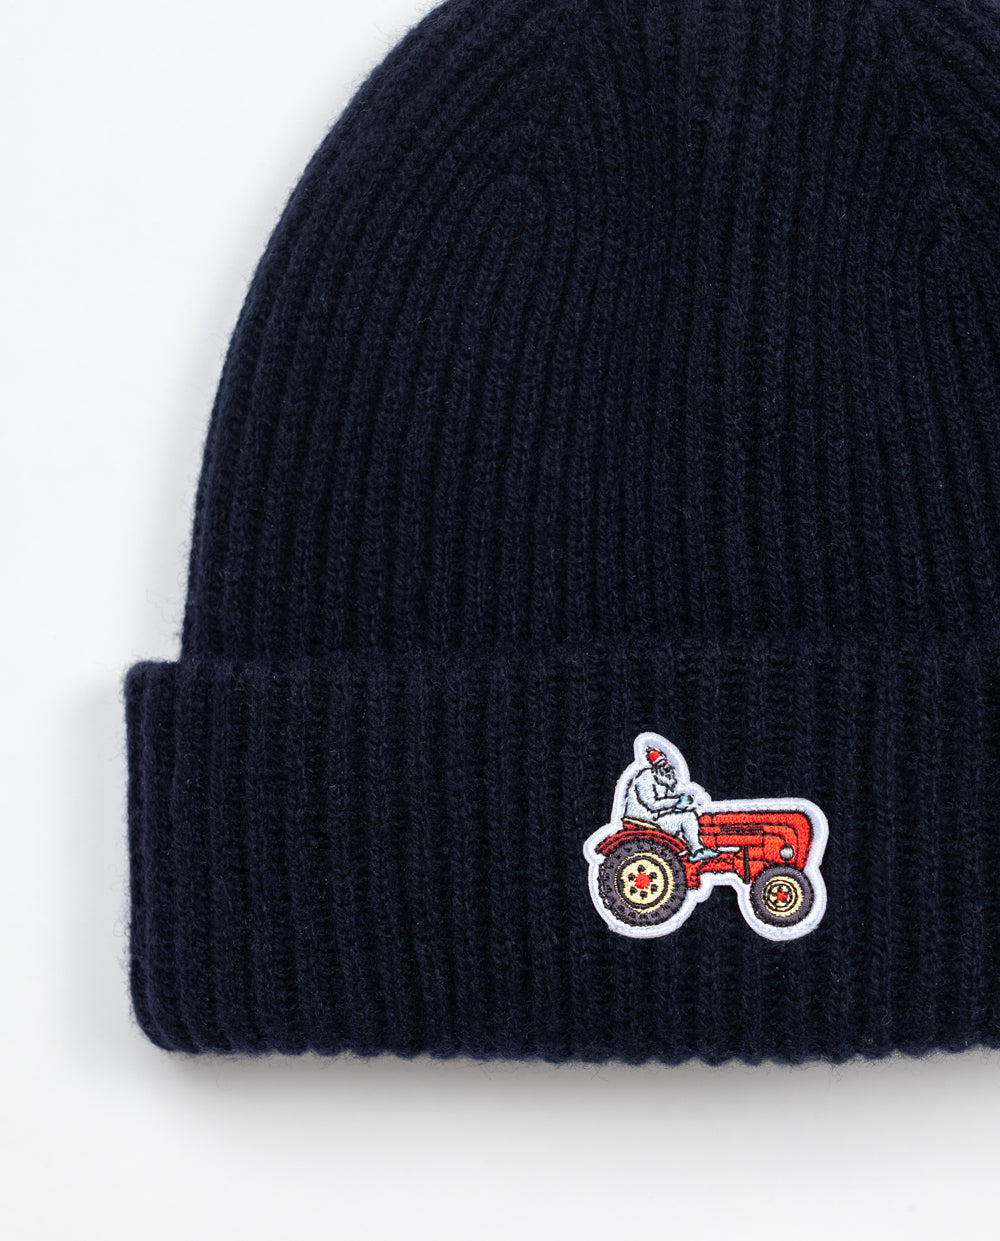 The Yeti on Tractor Beanie